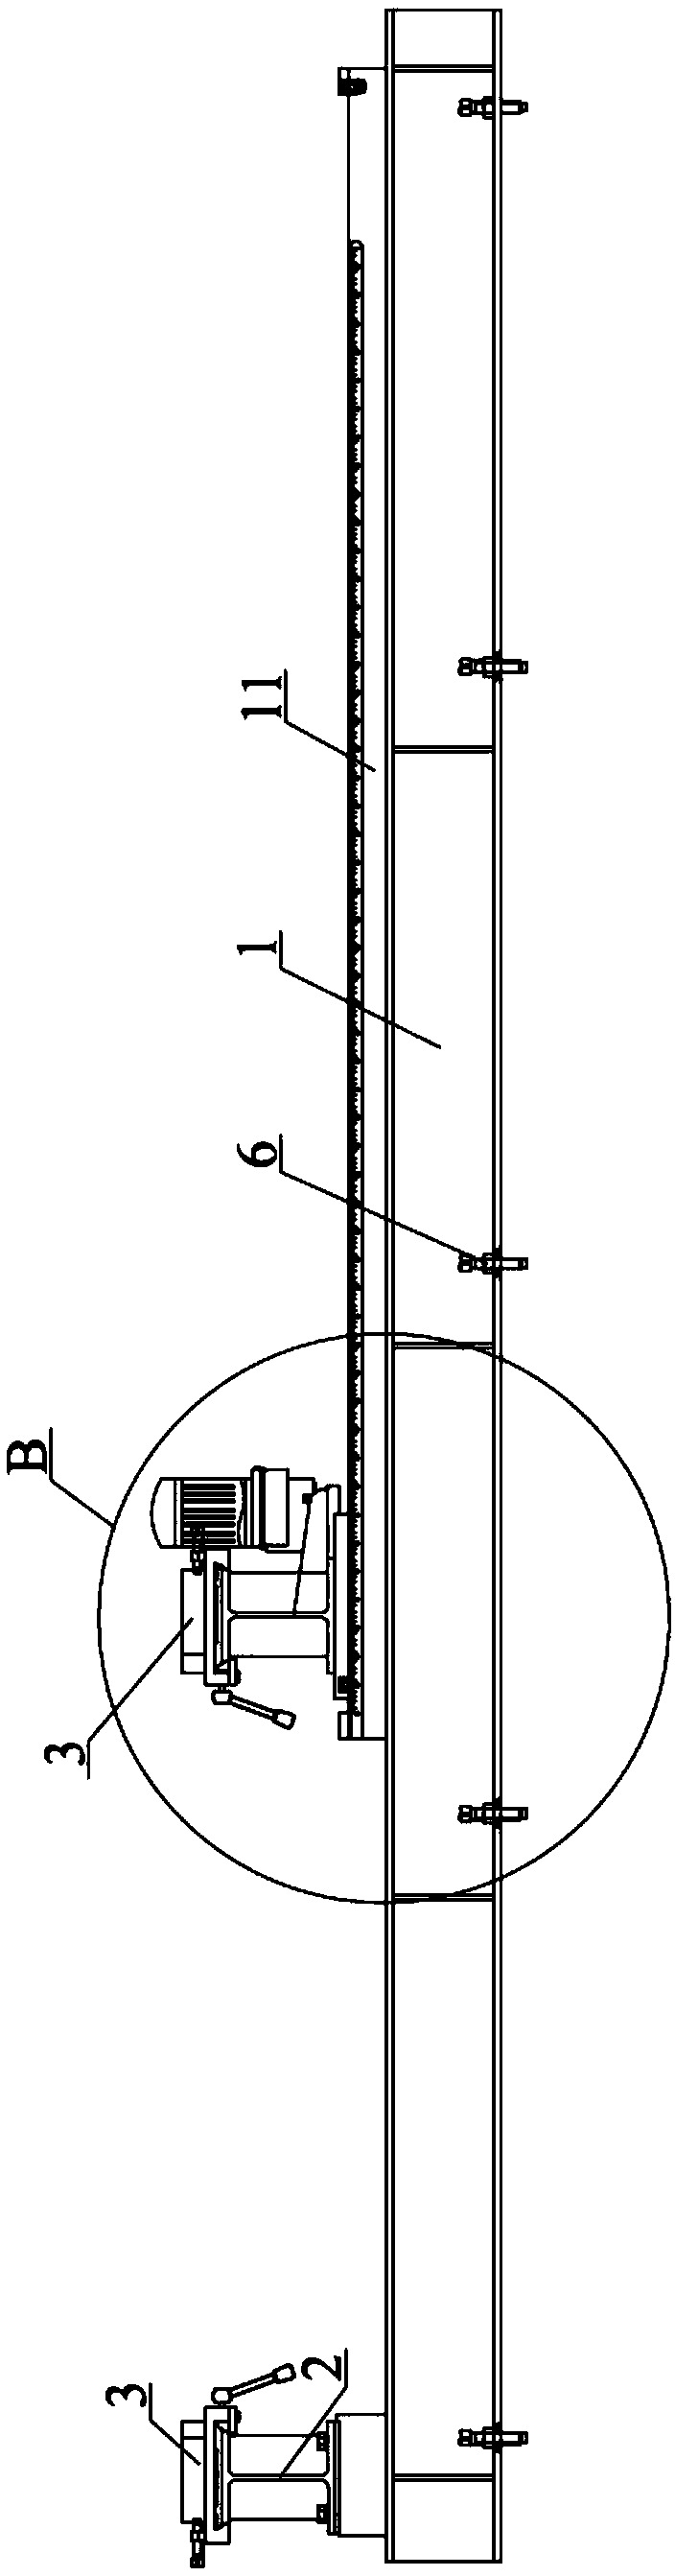 Frame assembly device for double-beam hoist trolley